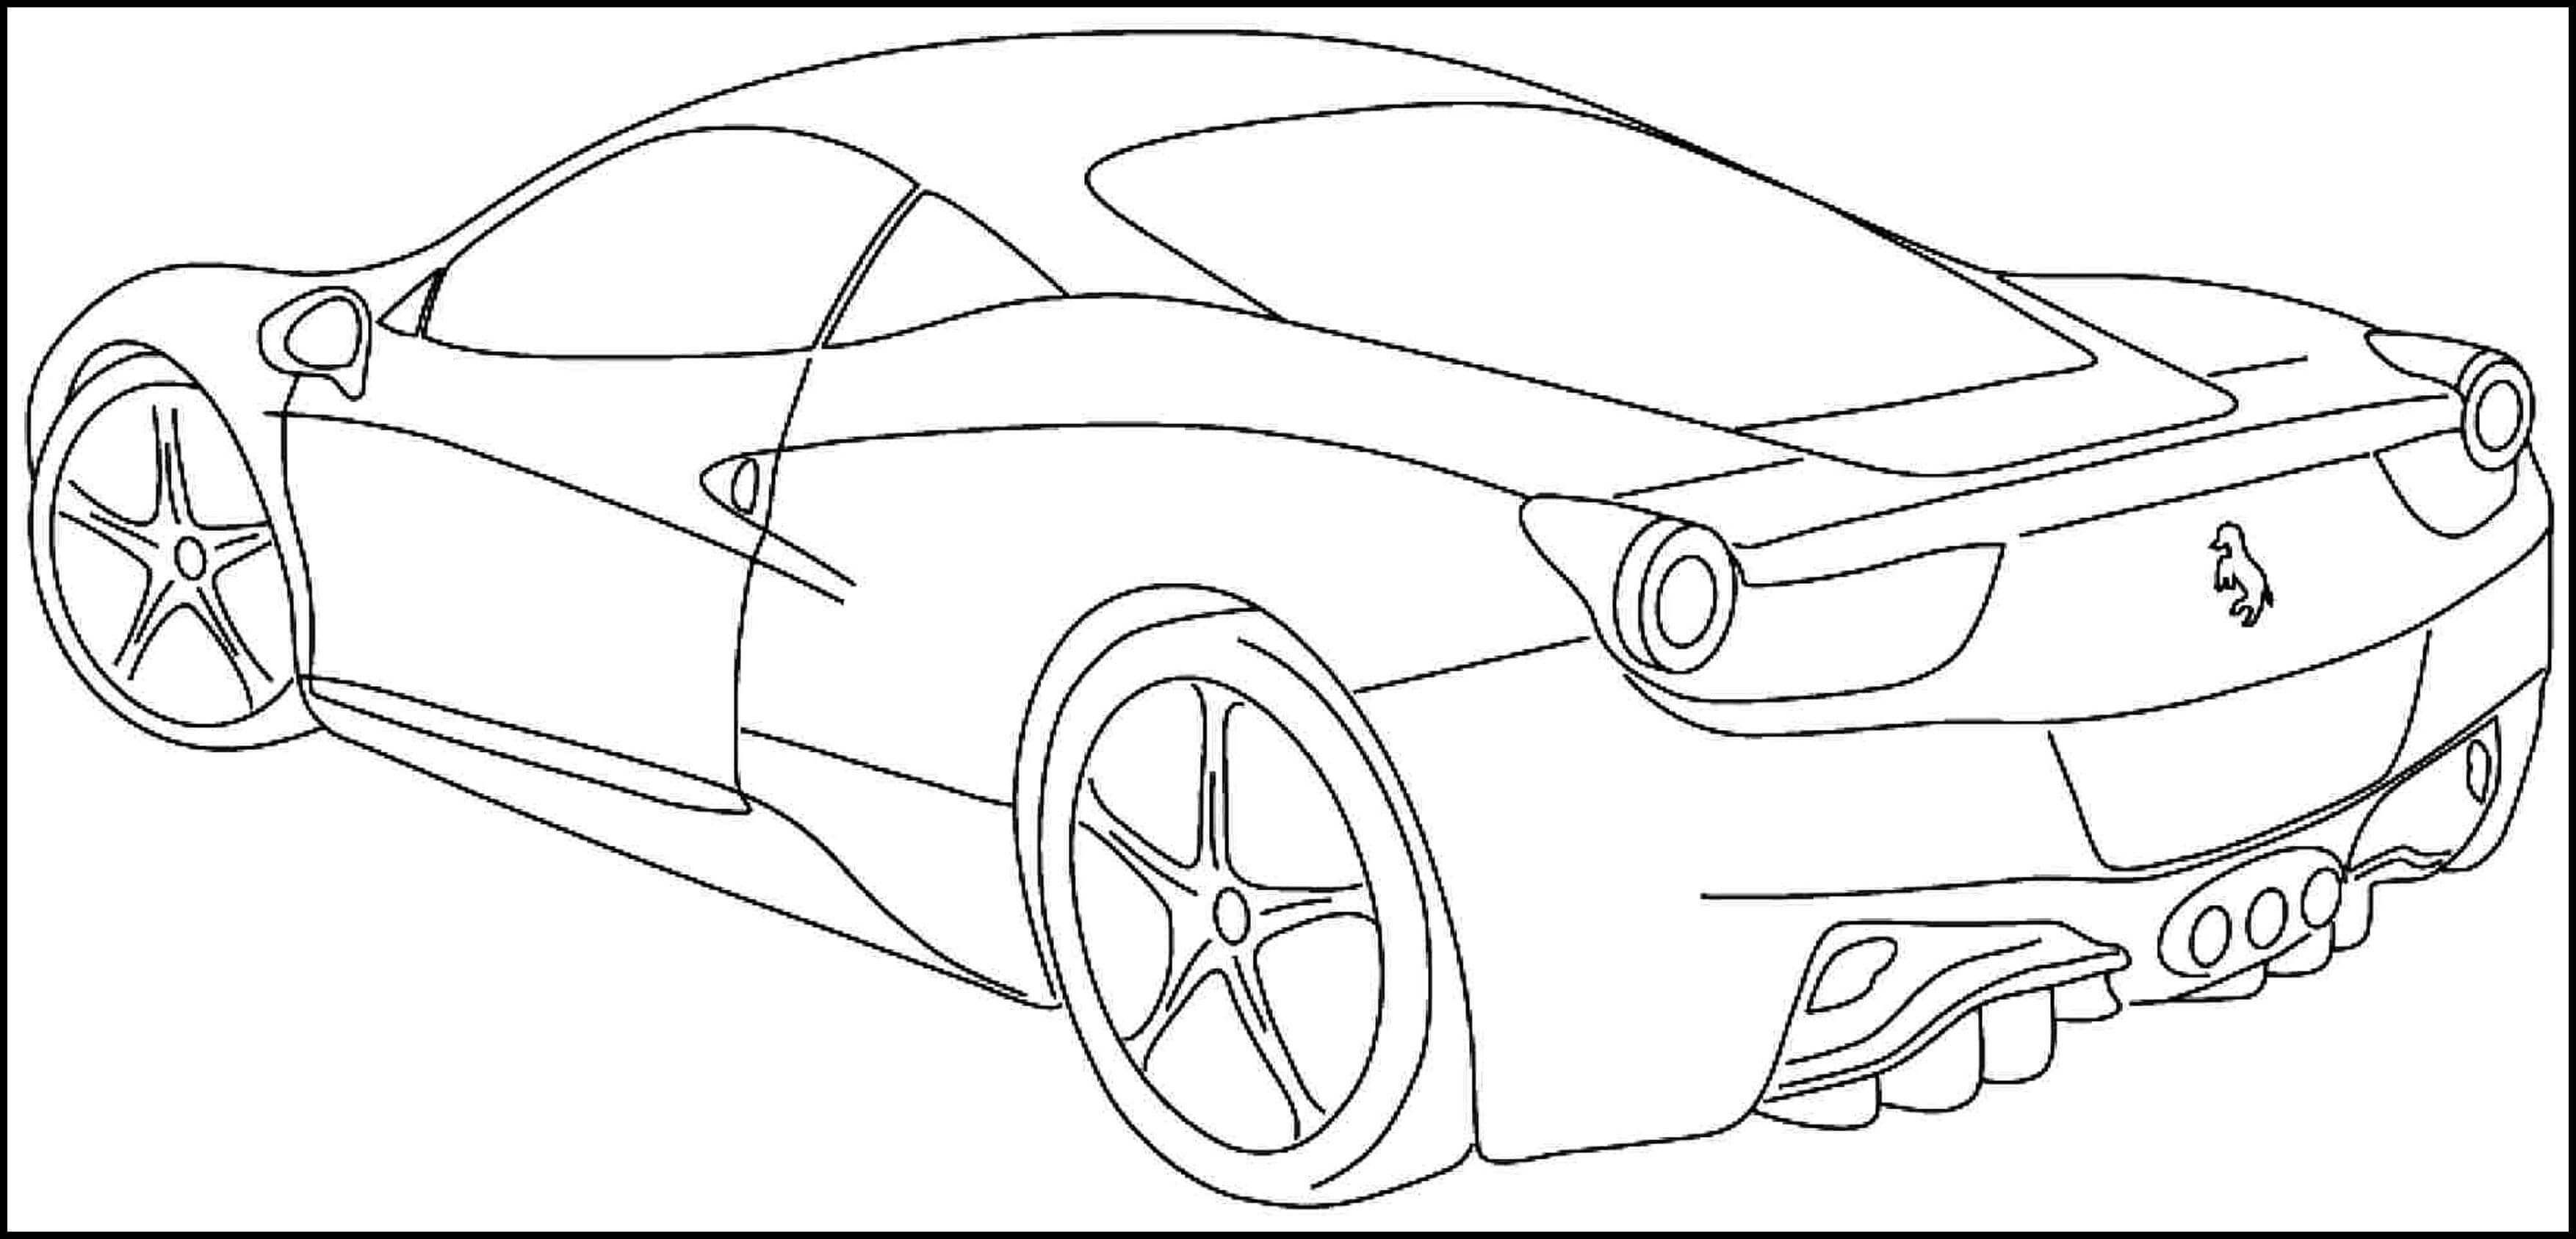 Coloring Pages For Boys Cars 32
 Printable sports car coloring pages for kids & teens